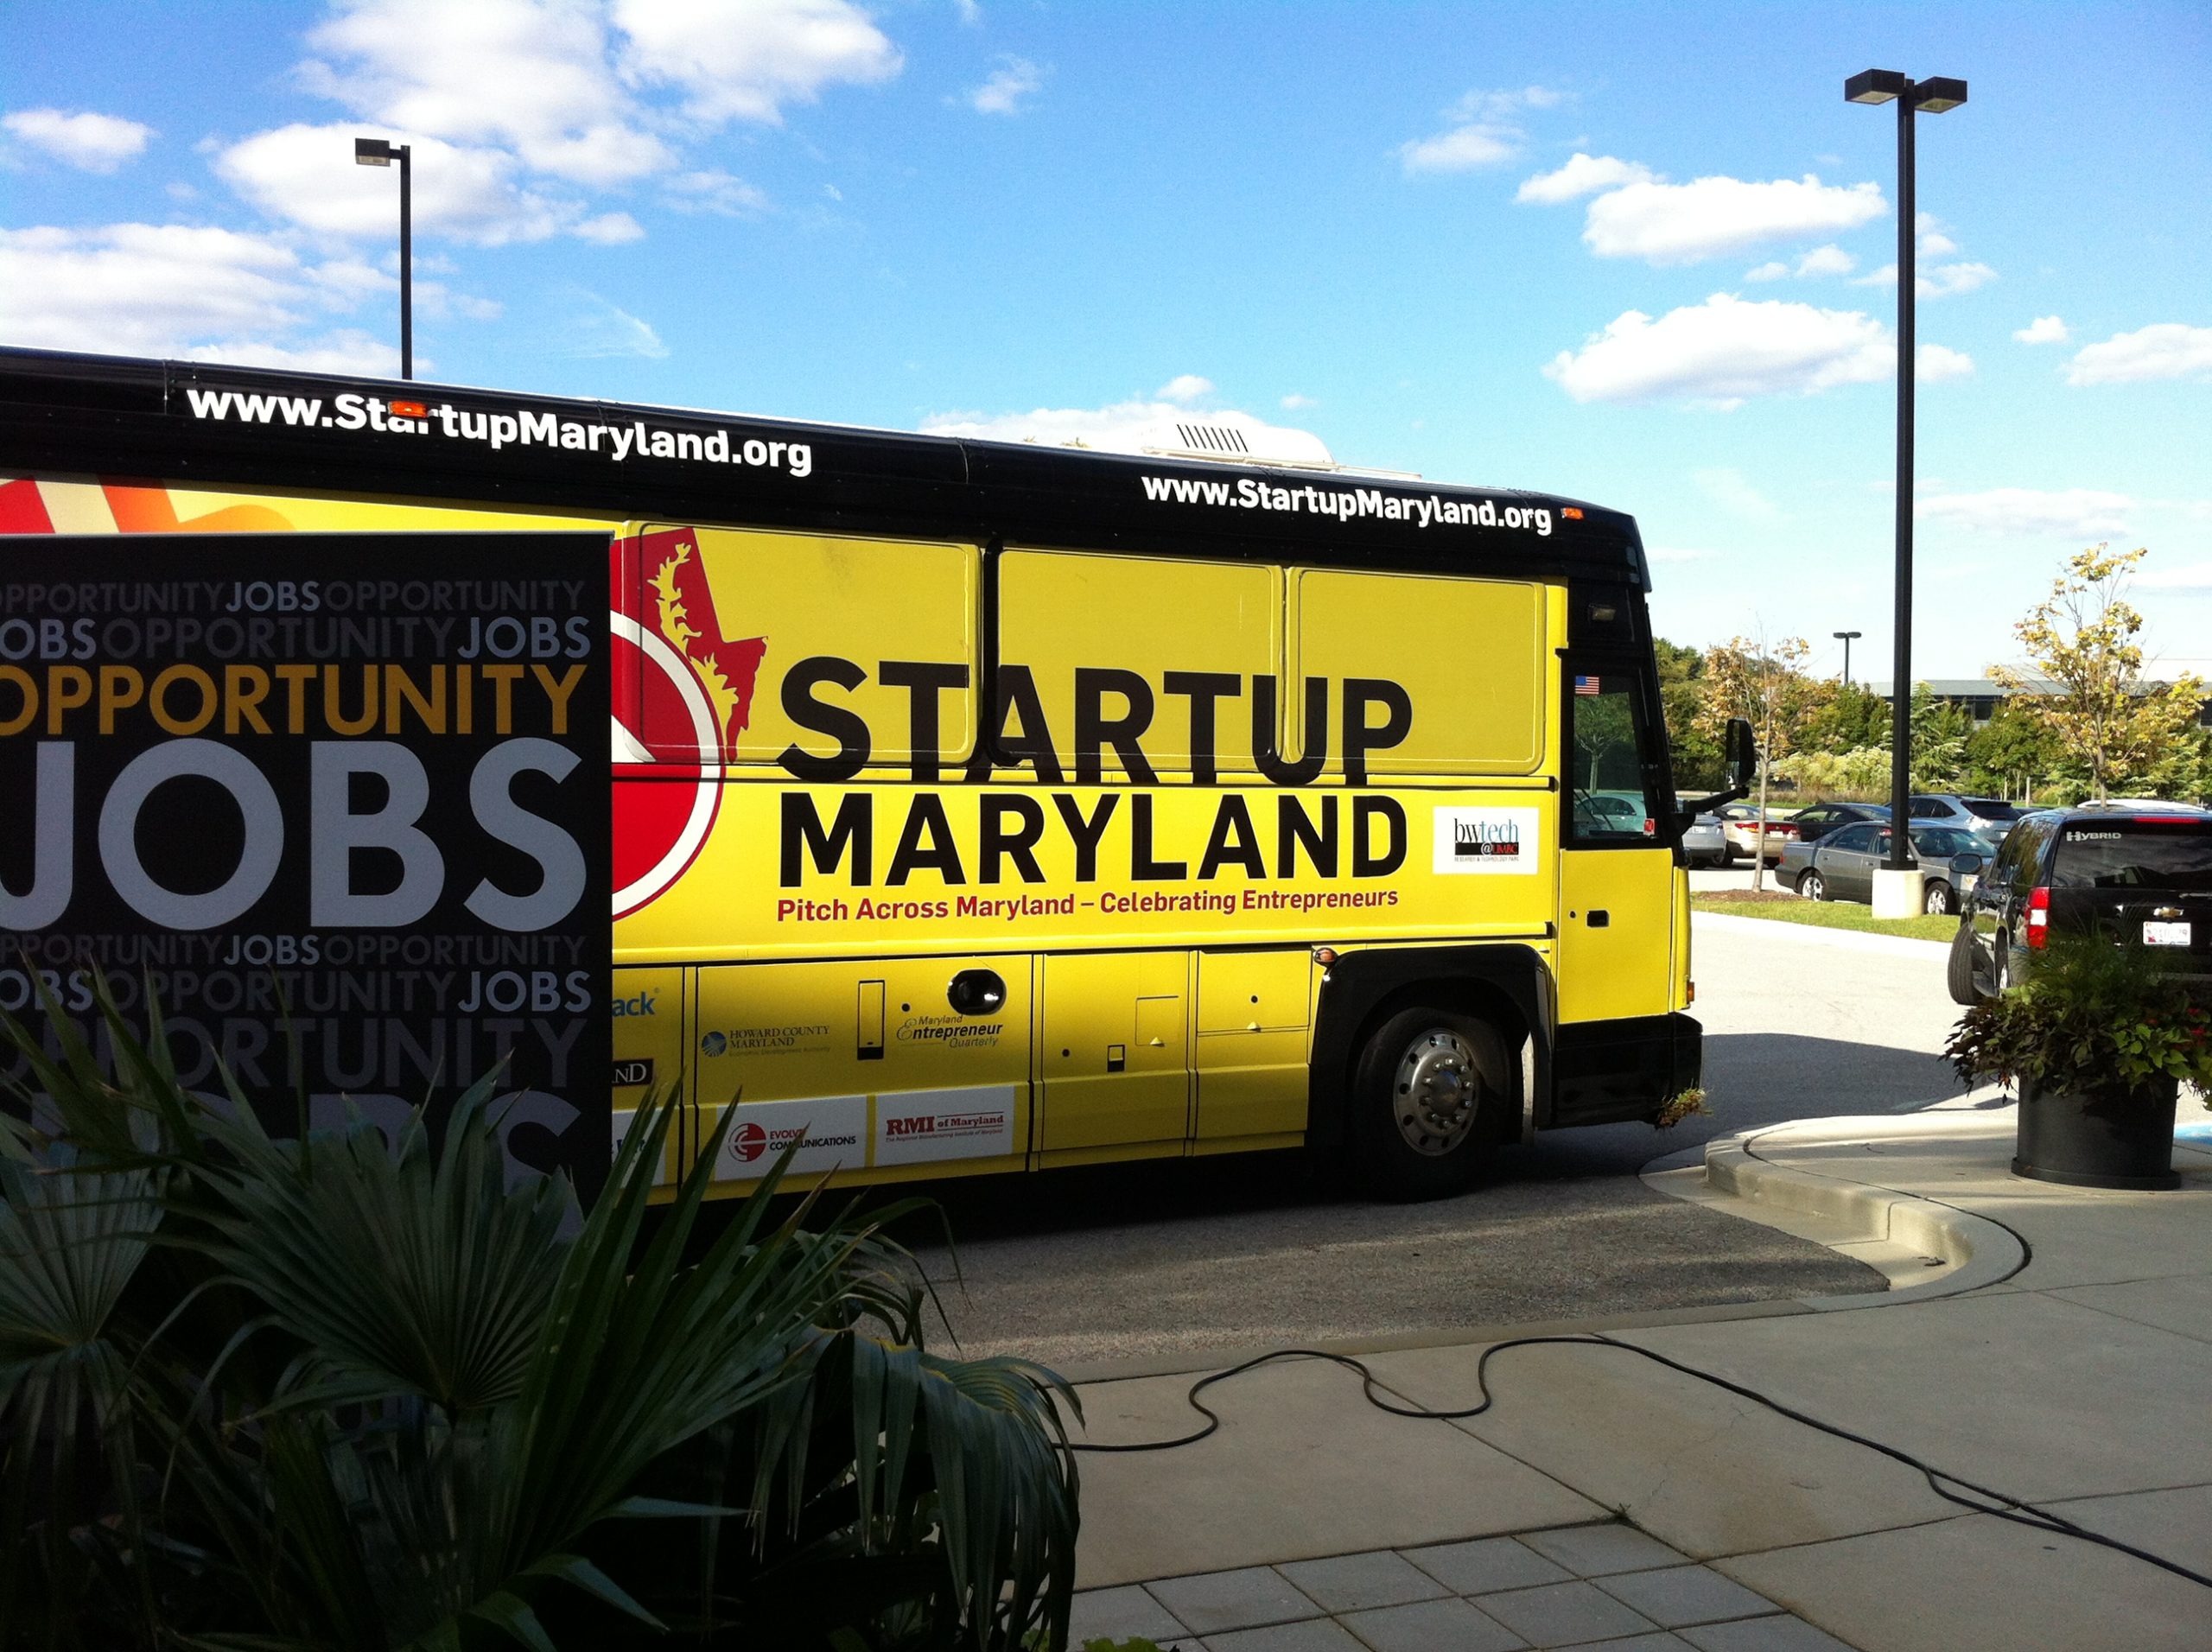 The Pitch Across Maryland bus.